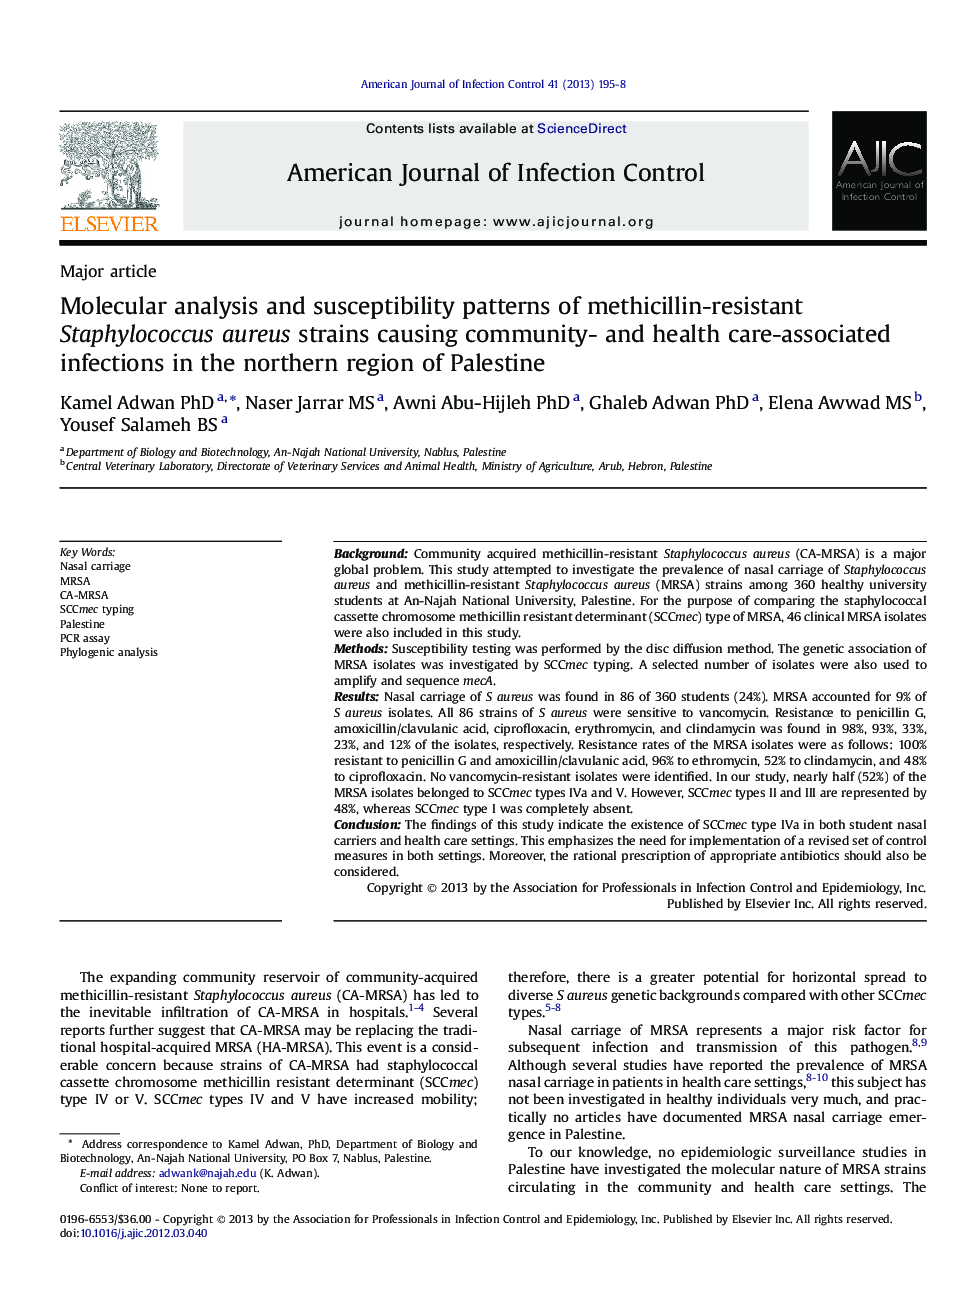 Molecular analysis and susceptibility patterns of methicillin-resistant Staphylococcus aureus strains causing community- and health care-associated infections in the northern region of Palestine